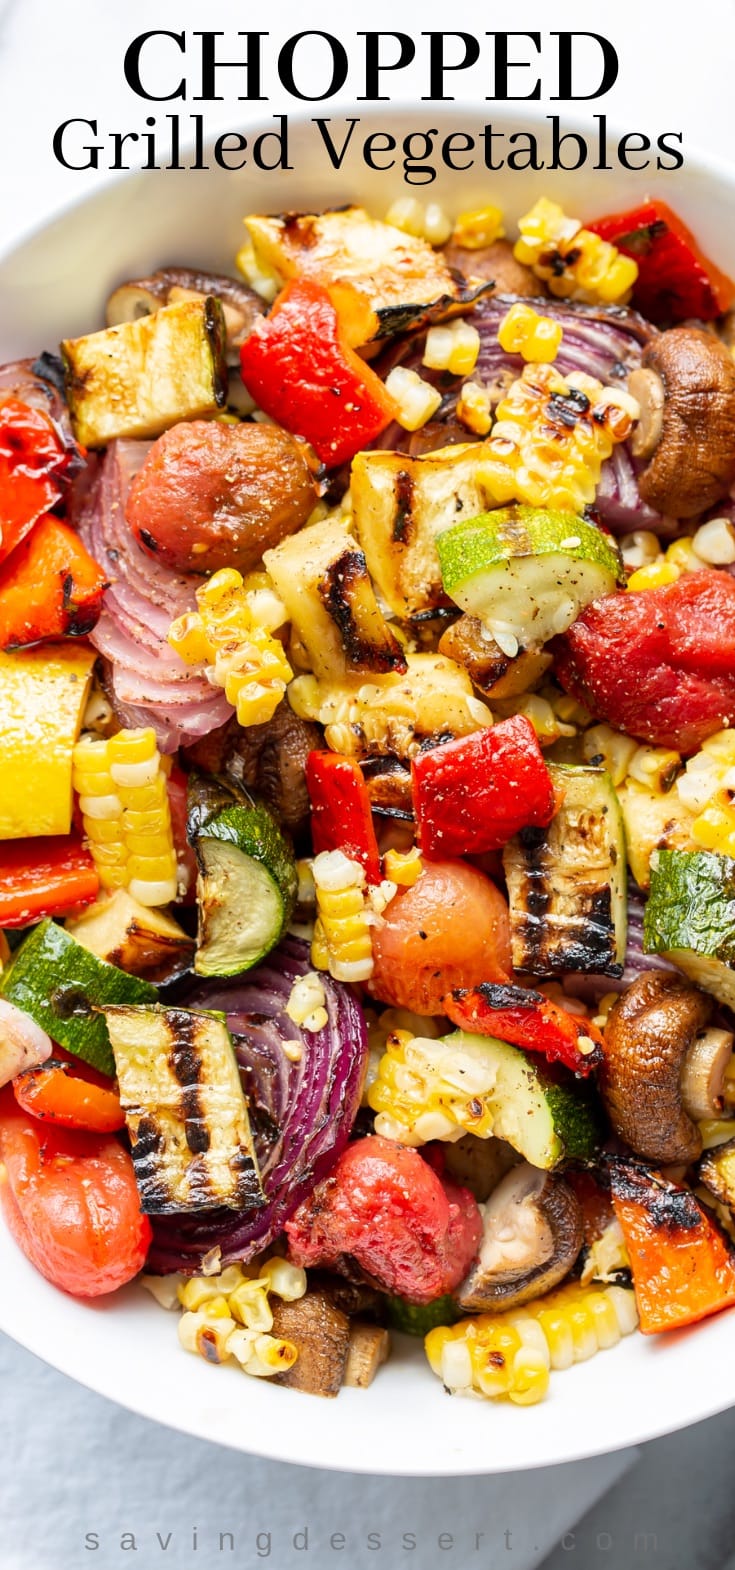 Grilled vegetables in a bowl - corn, squash, eggplant, onion, peppers and tomatoes